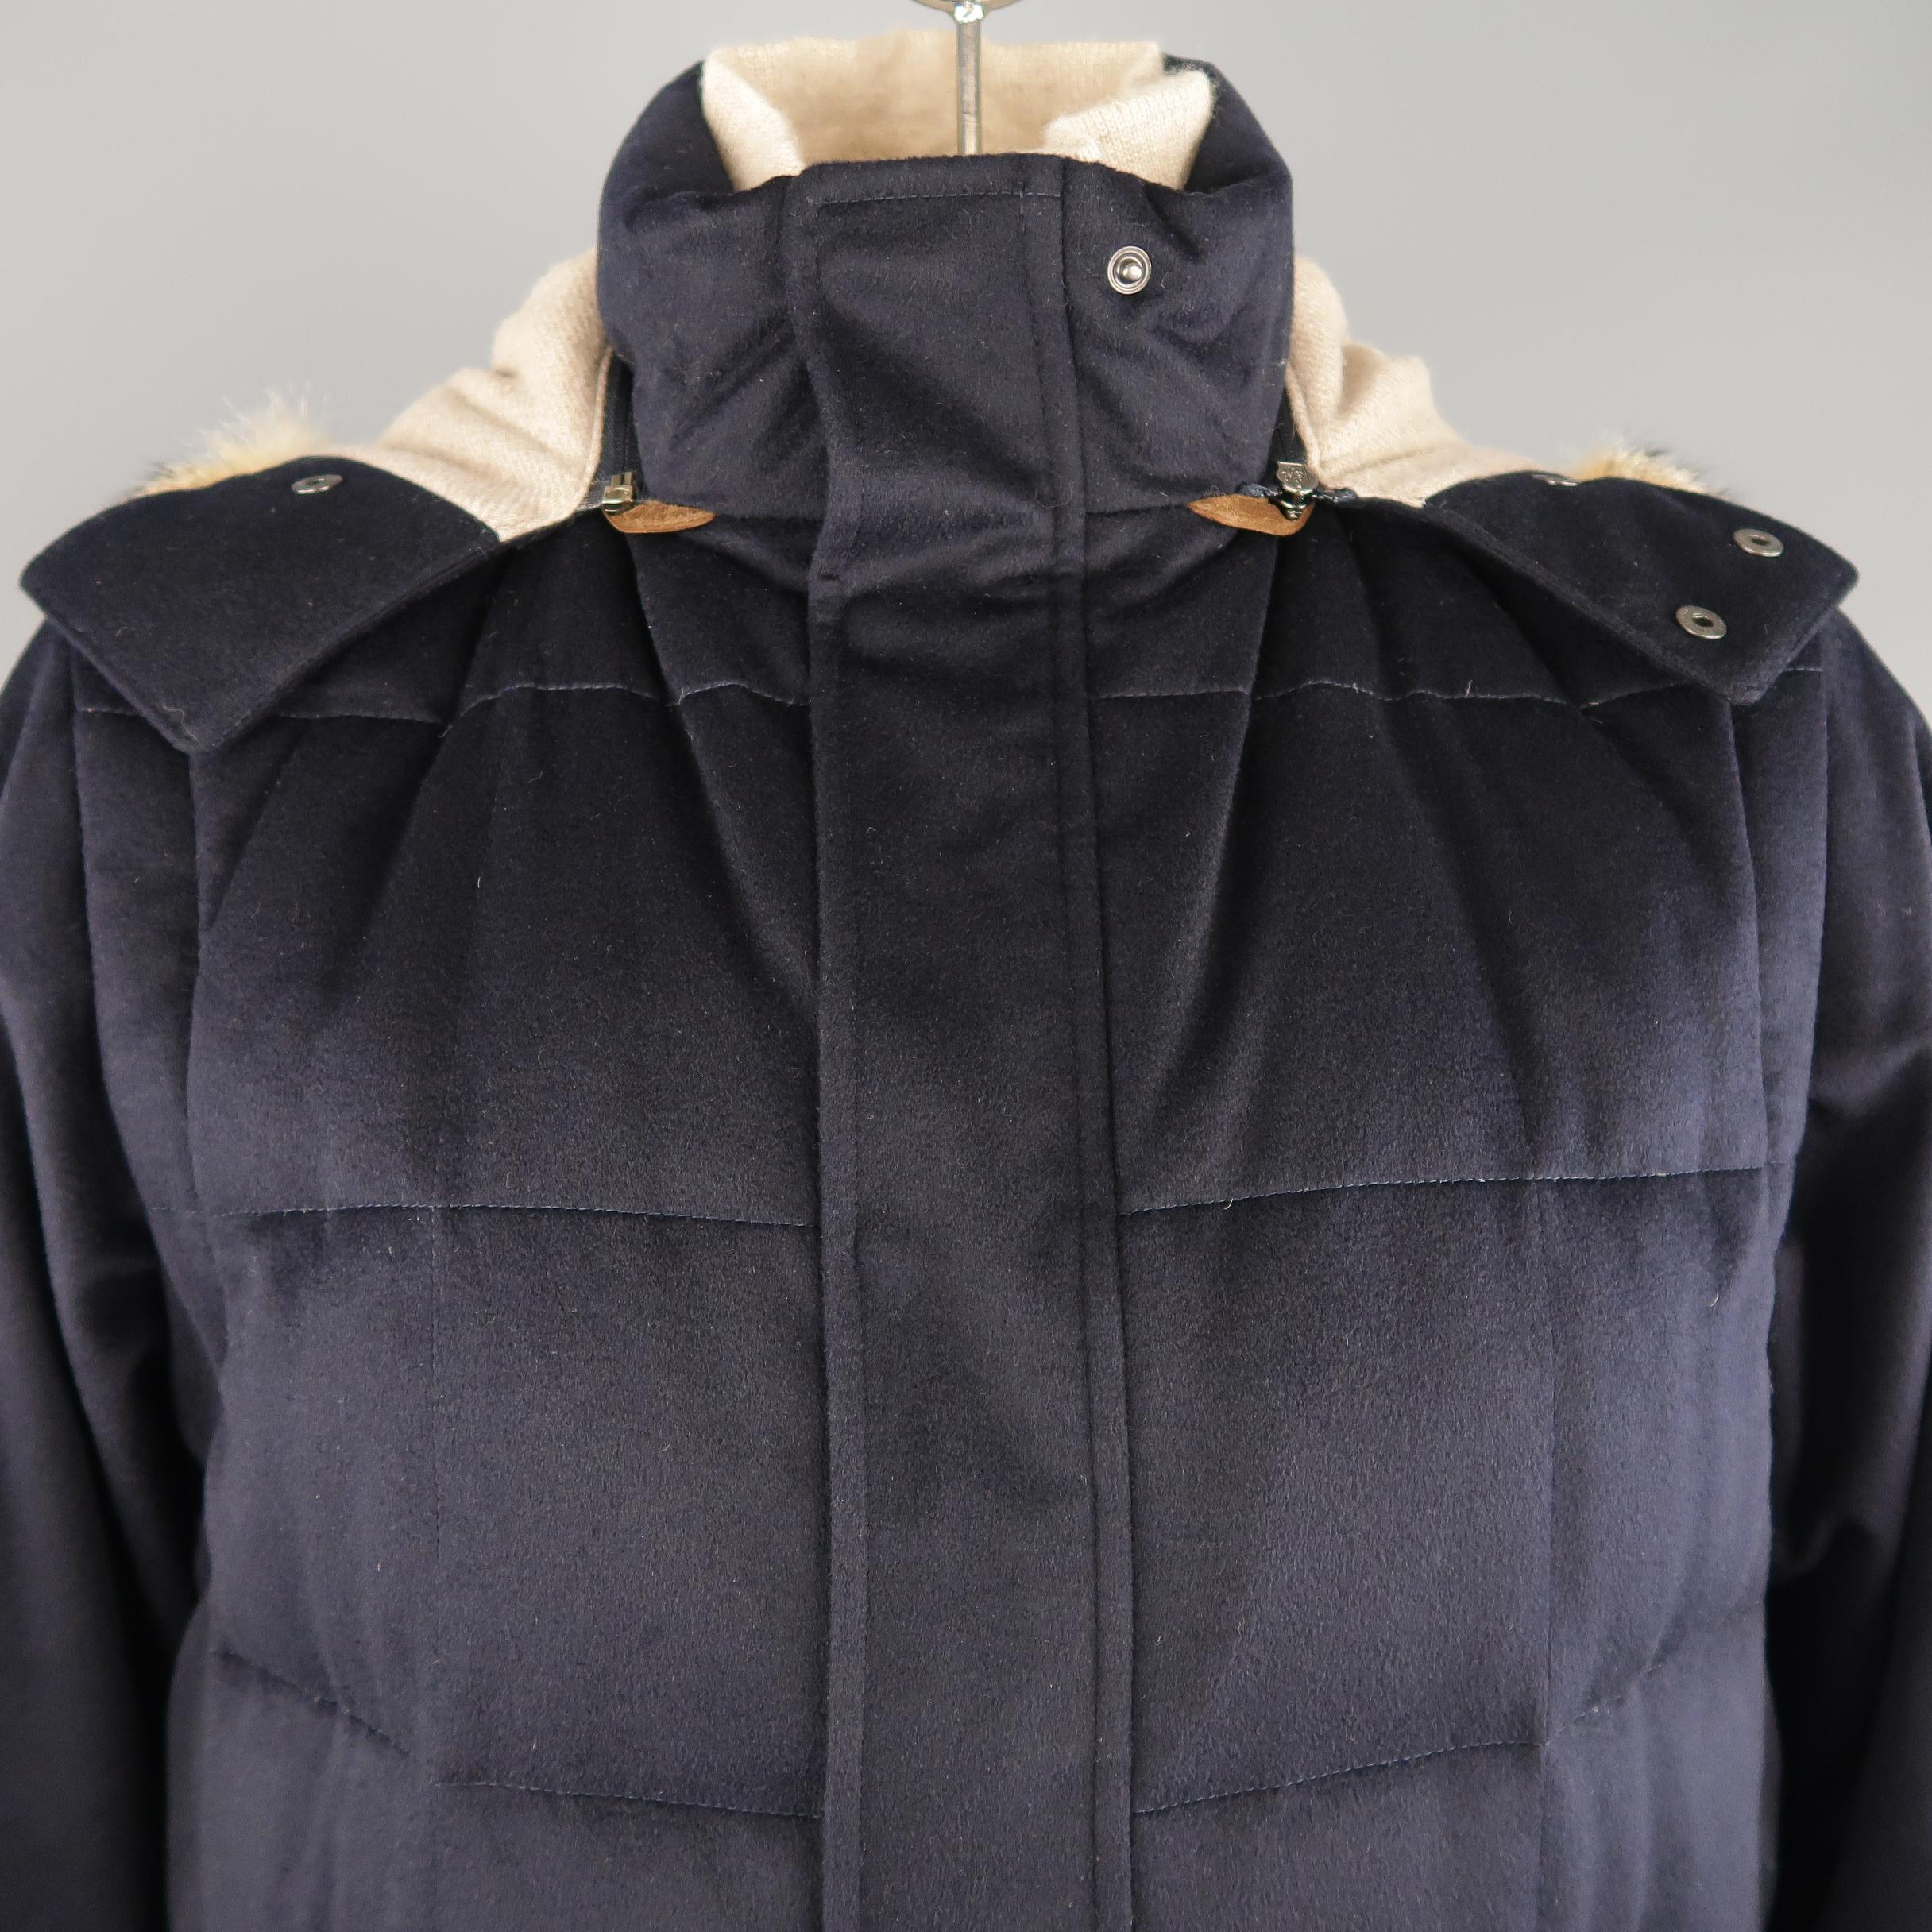 LORO PIANA parka comes in navy down filled navy quilted cashmere with a high collar, hidden snap placket zip closure, slanted pockets, navy suede trim, zip off sleeves, and detachable hood with beige knit liner and fur trim. Made in Italy.    
 
New